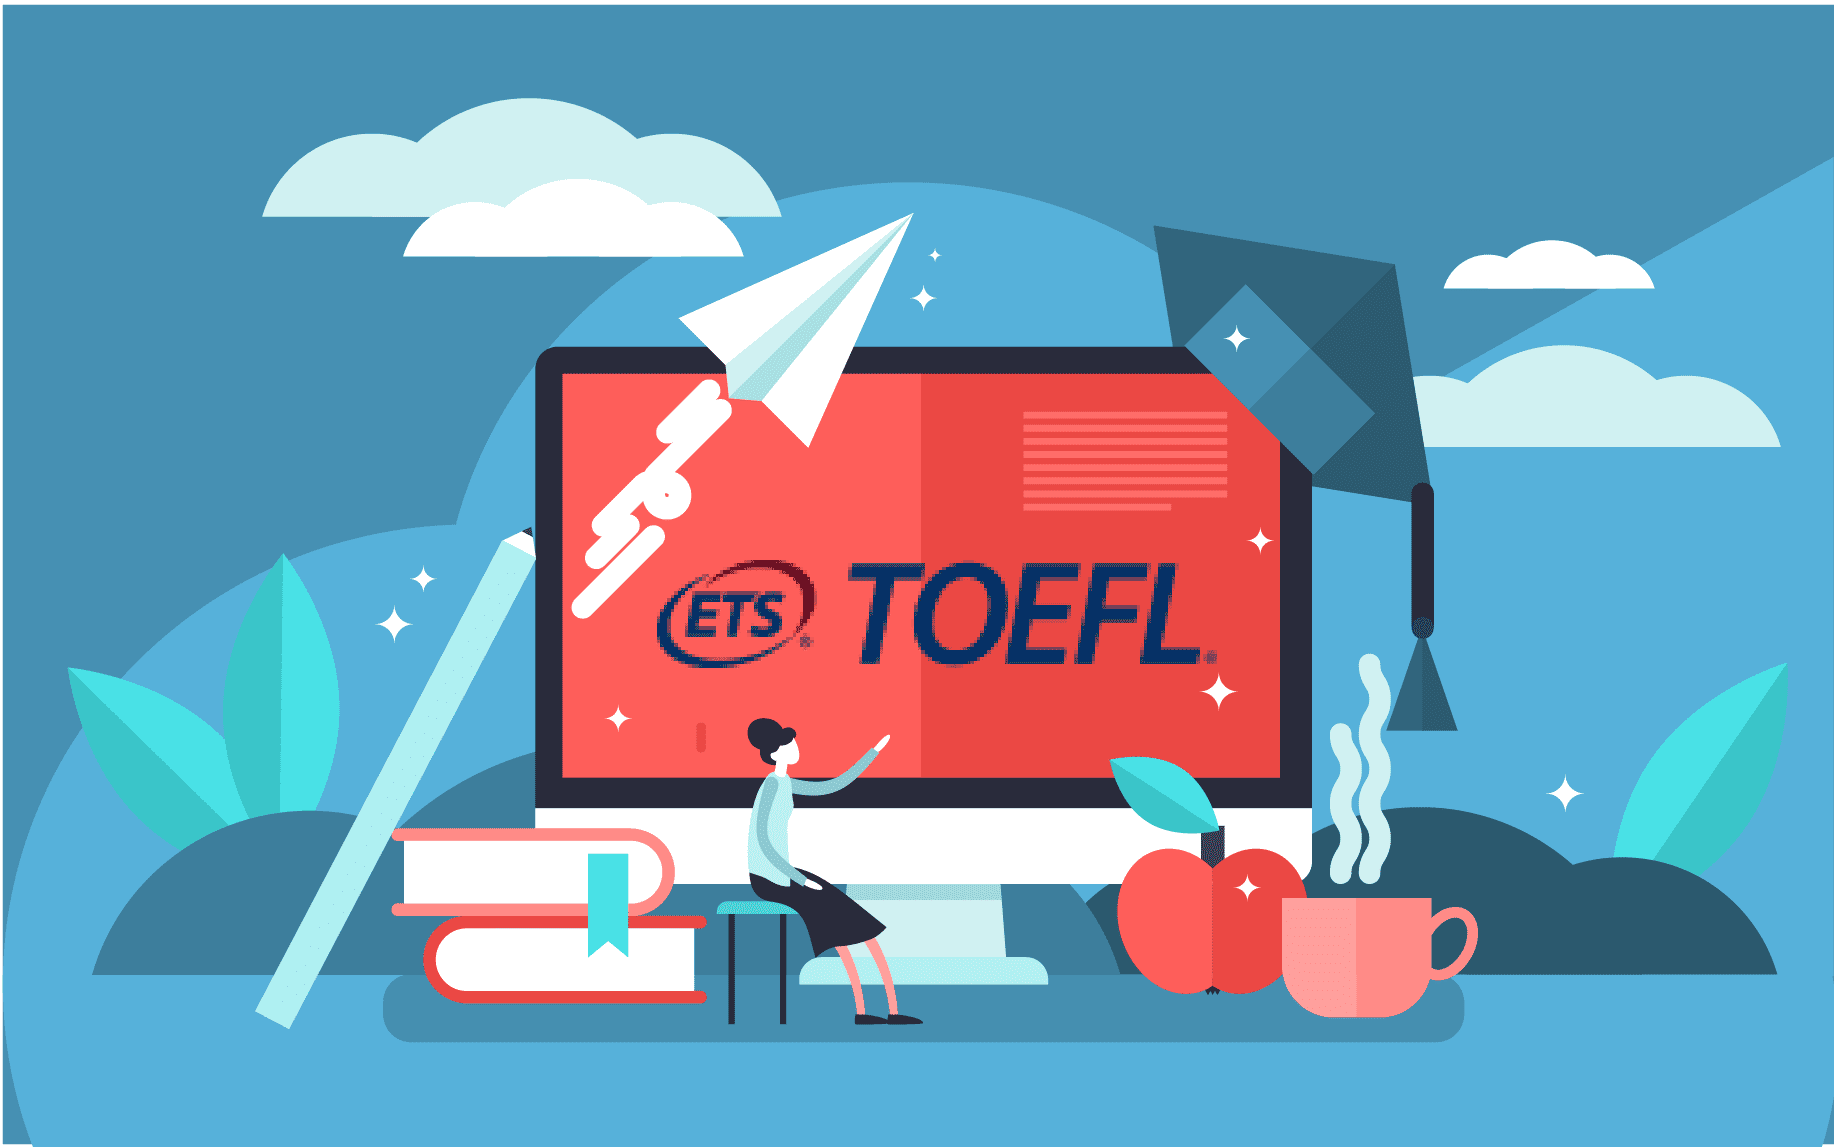 TOEFL Test: Structure, Scoring, and Preparation Tips